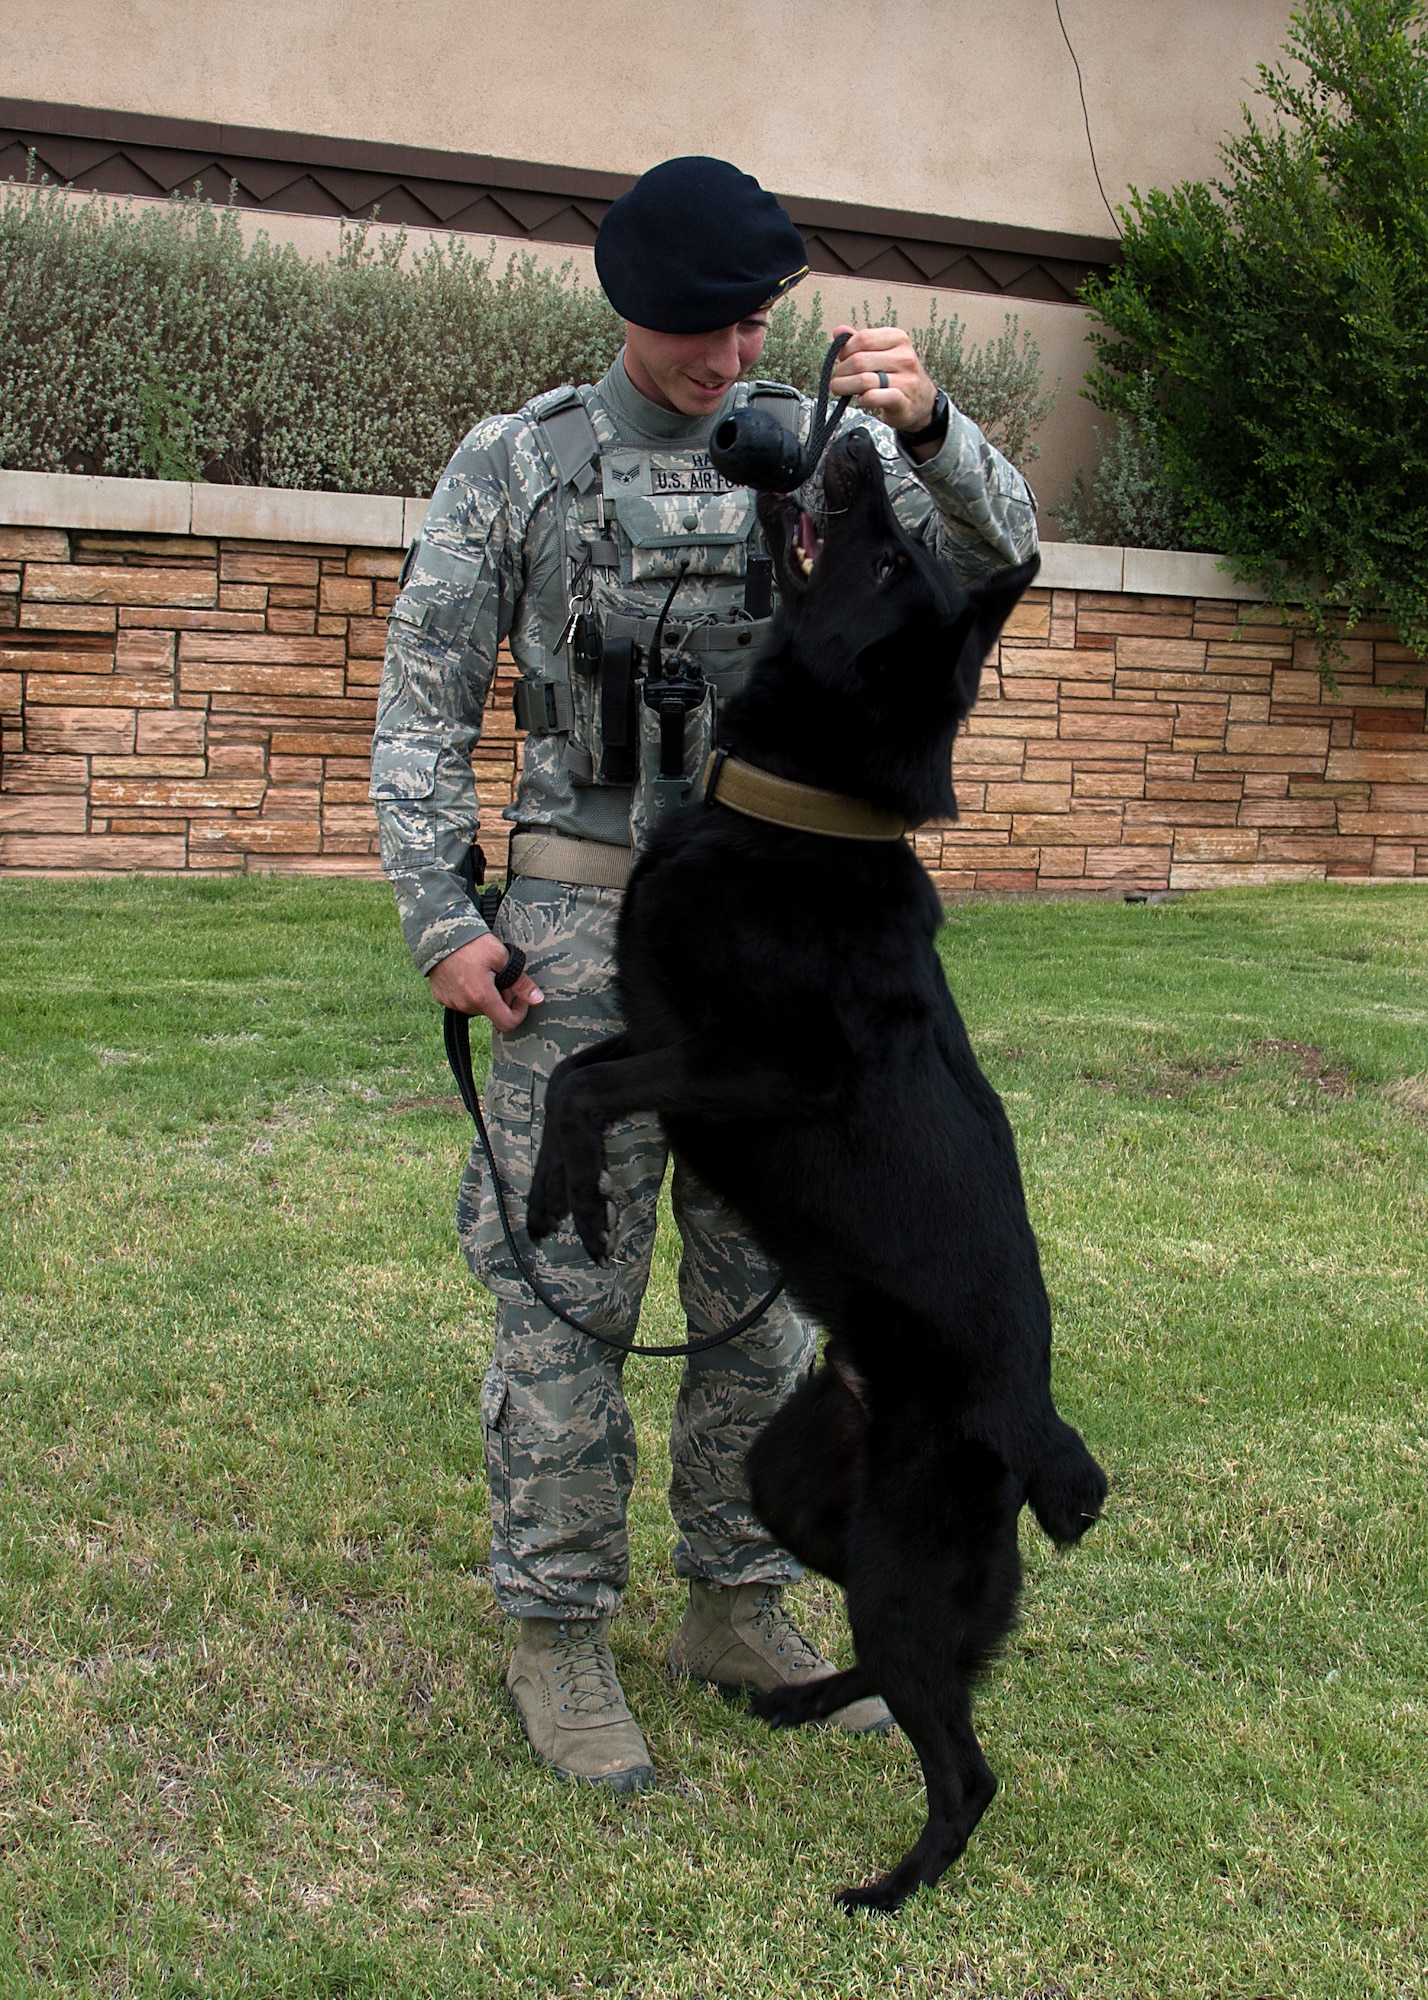 Vulkan, military working dog for the 49th Security Forces Squadron, plays with his owner, Senior Airman William Hale, MWD handler for the 49 SFS, before his retirement ceremony at Holloman Air Force Base, N.M., July 27, 2018. Vulkan's loyalty to his handlers allowed for the completion of more than 10,000 hours of explosive detection for Holloman, while also completing more than 2,000 random anti-terrorism measures and vehicle searches.